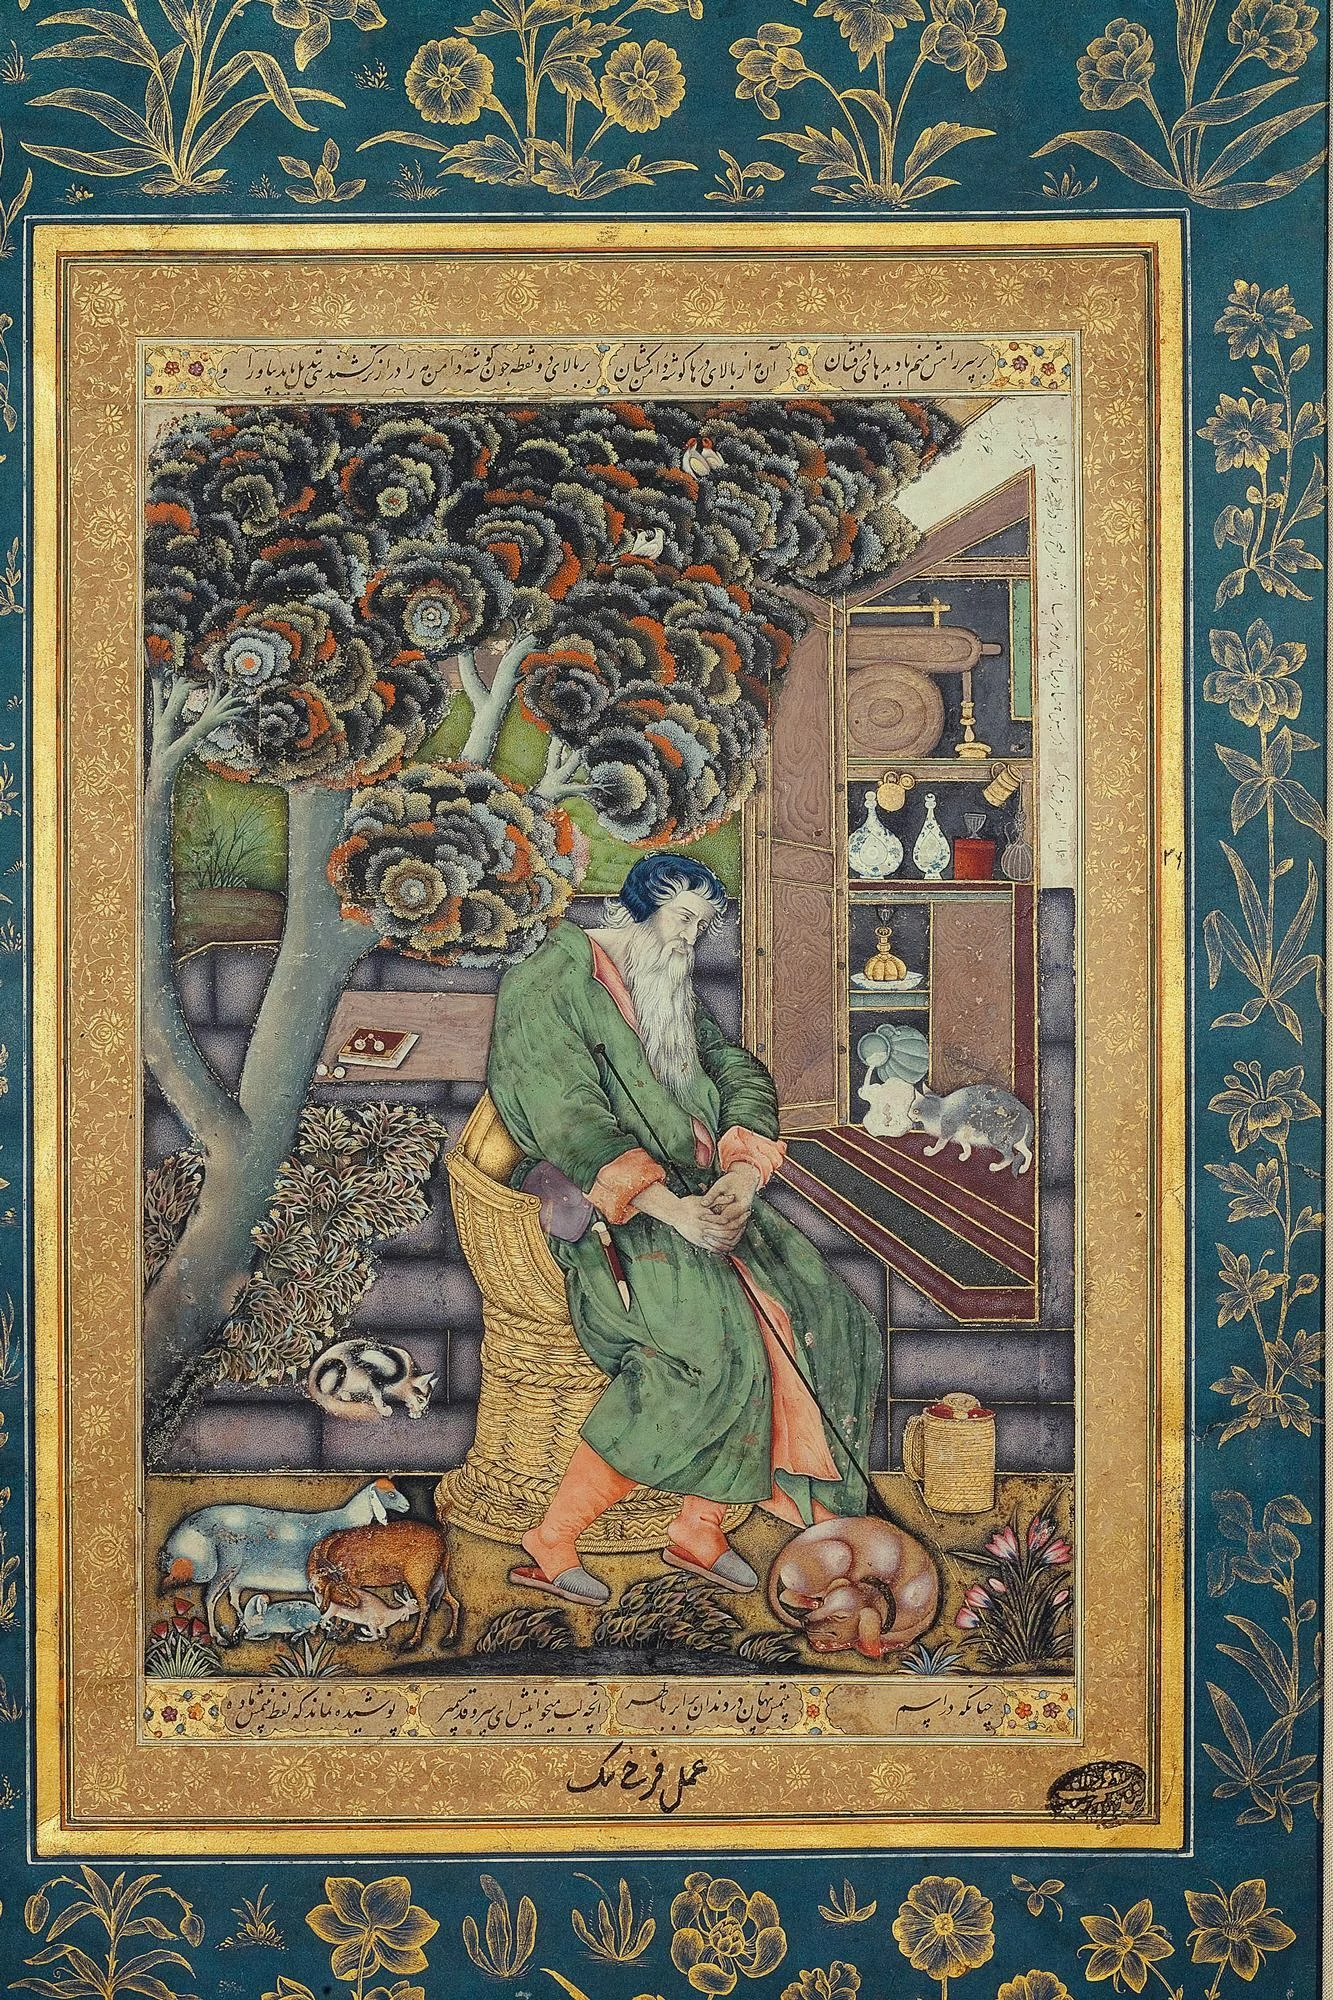 A Sufi Sage, The Personification of Melancholia, Farrukh Beg